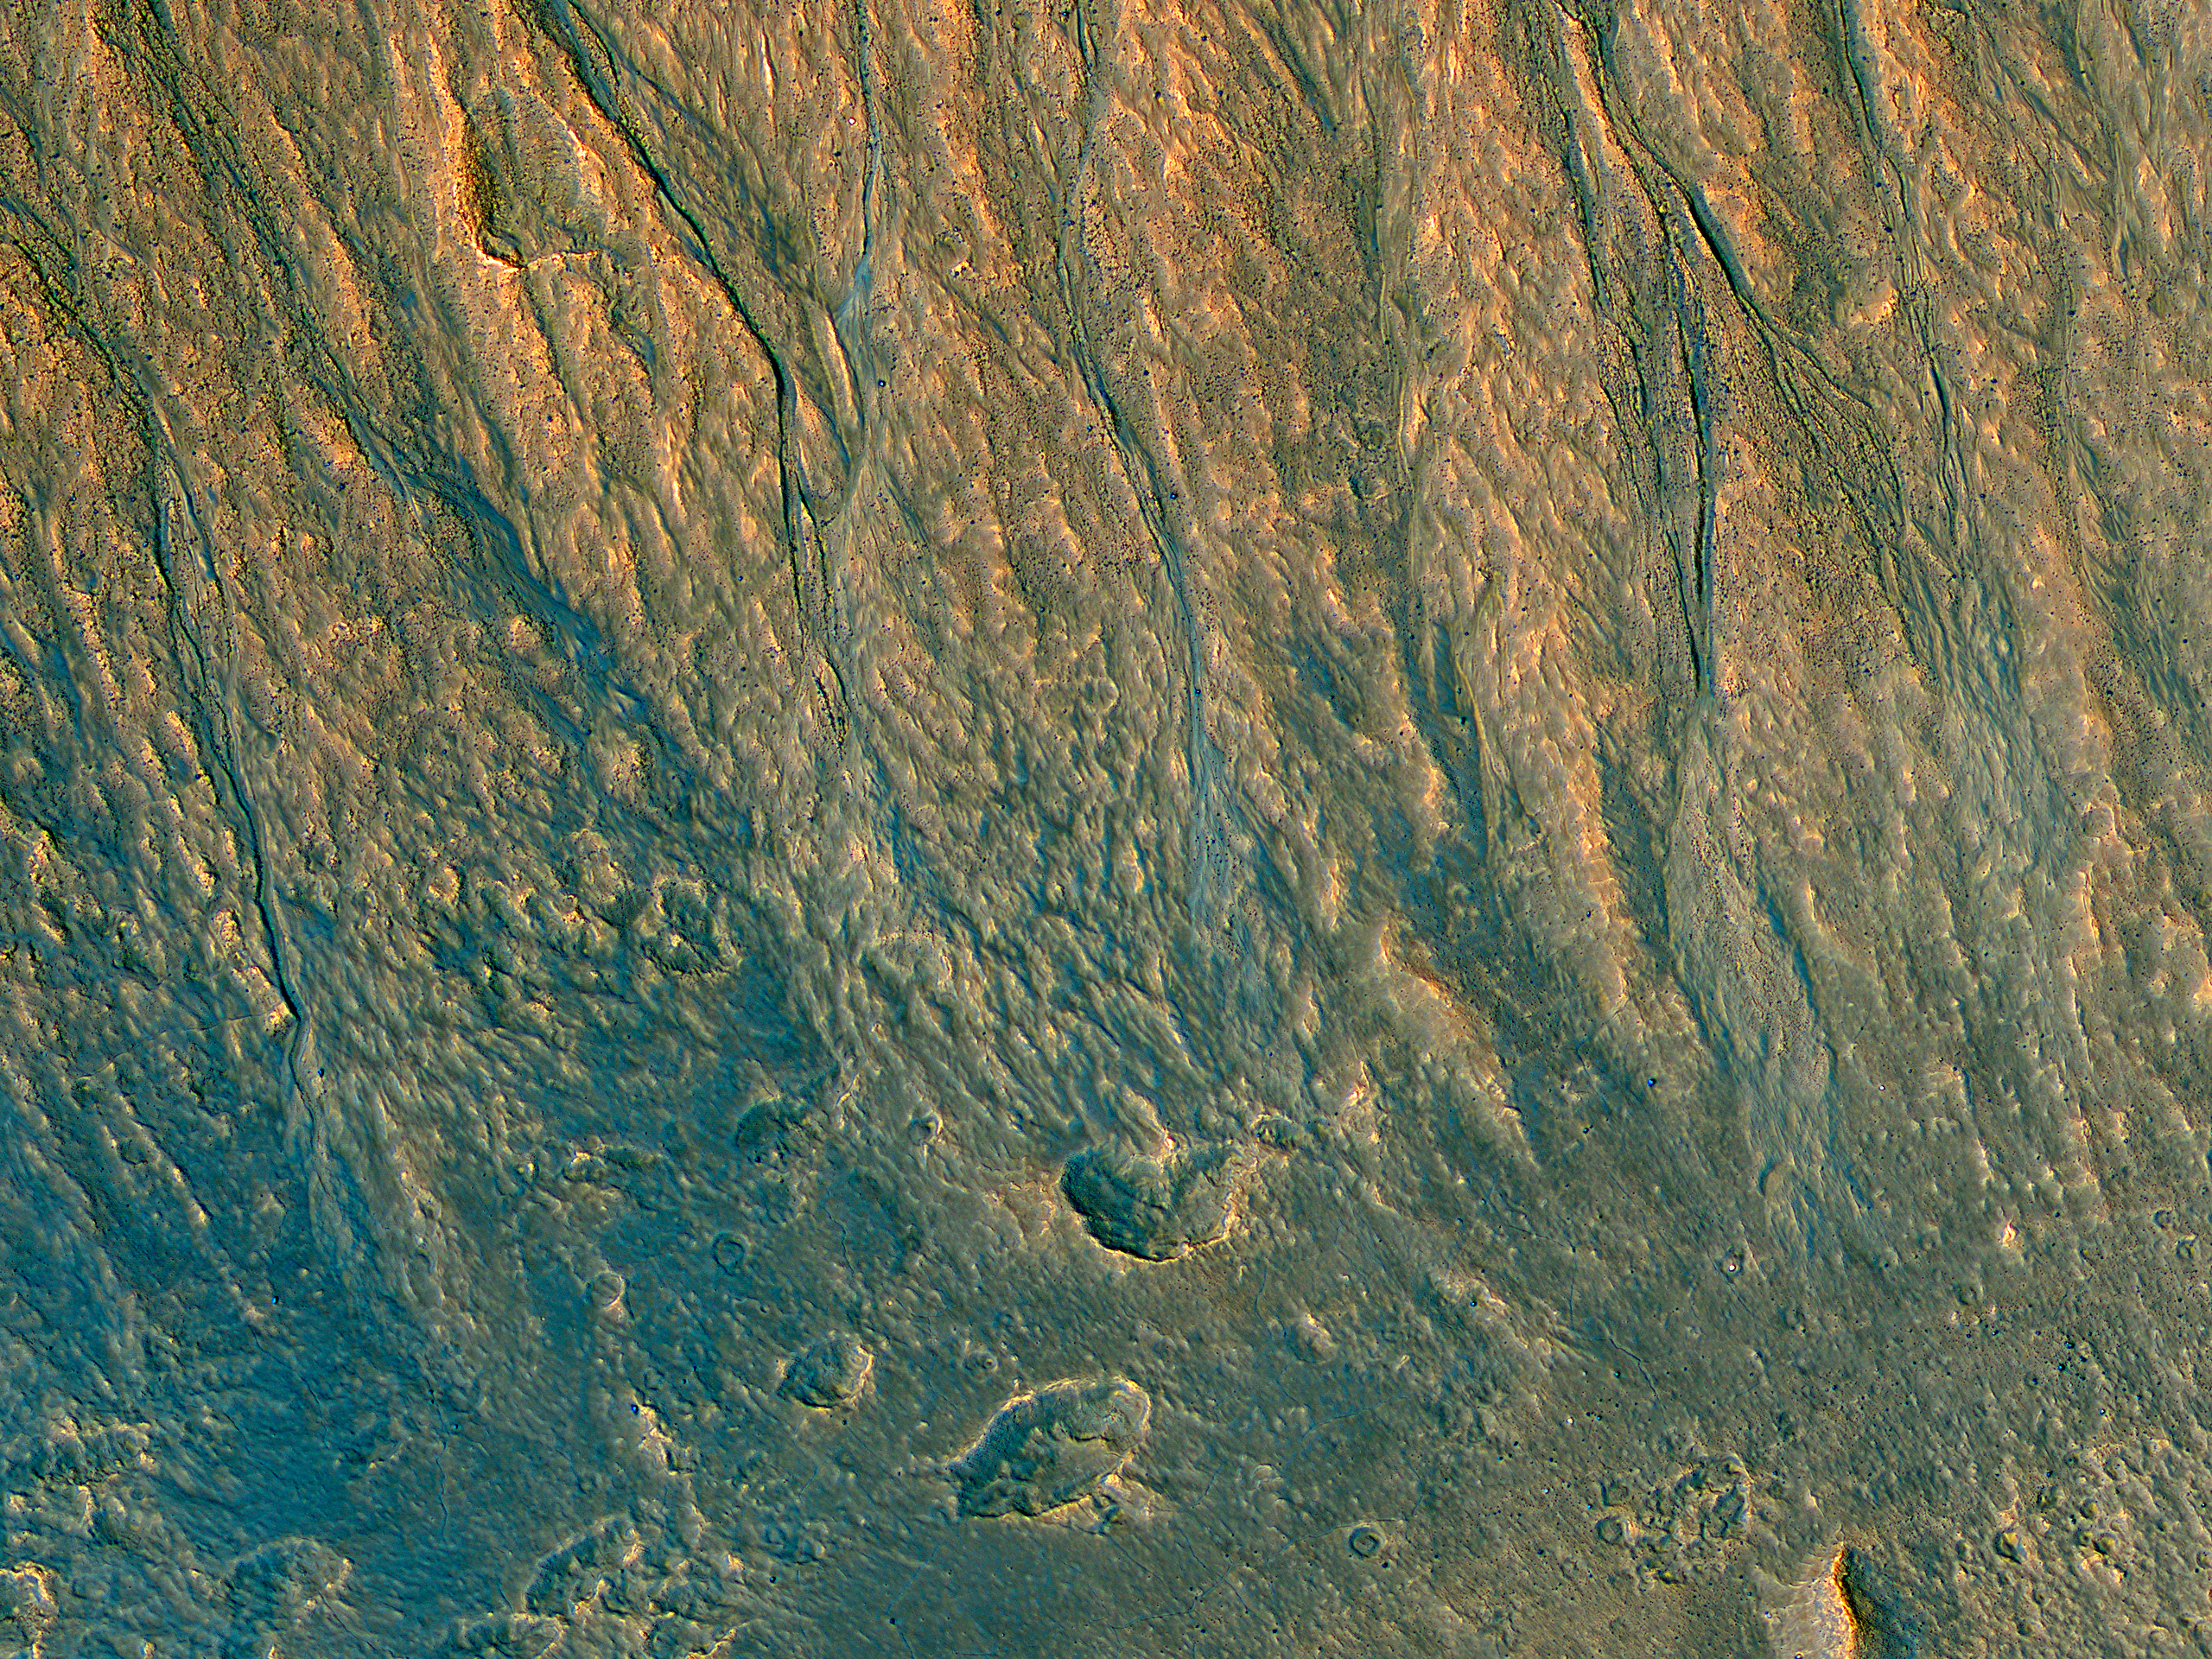 Gullies with Color Anomalies